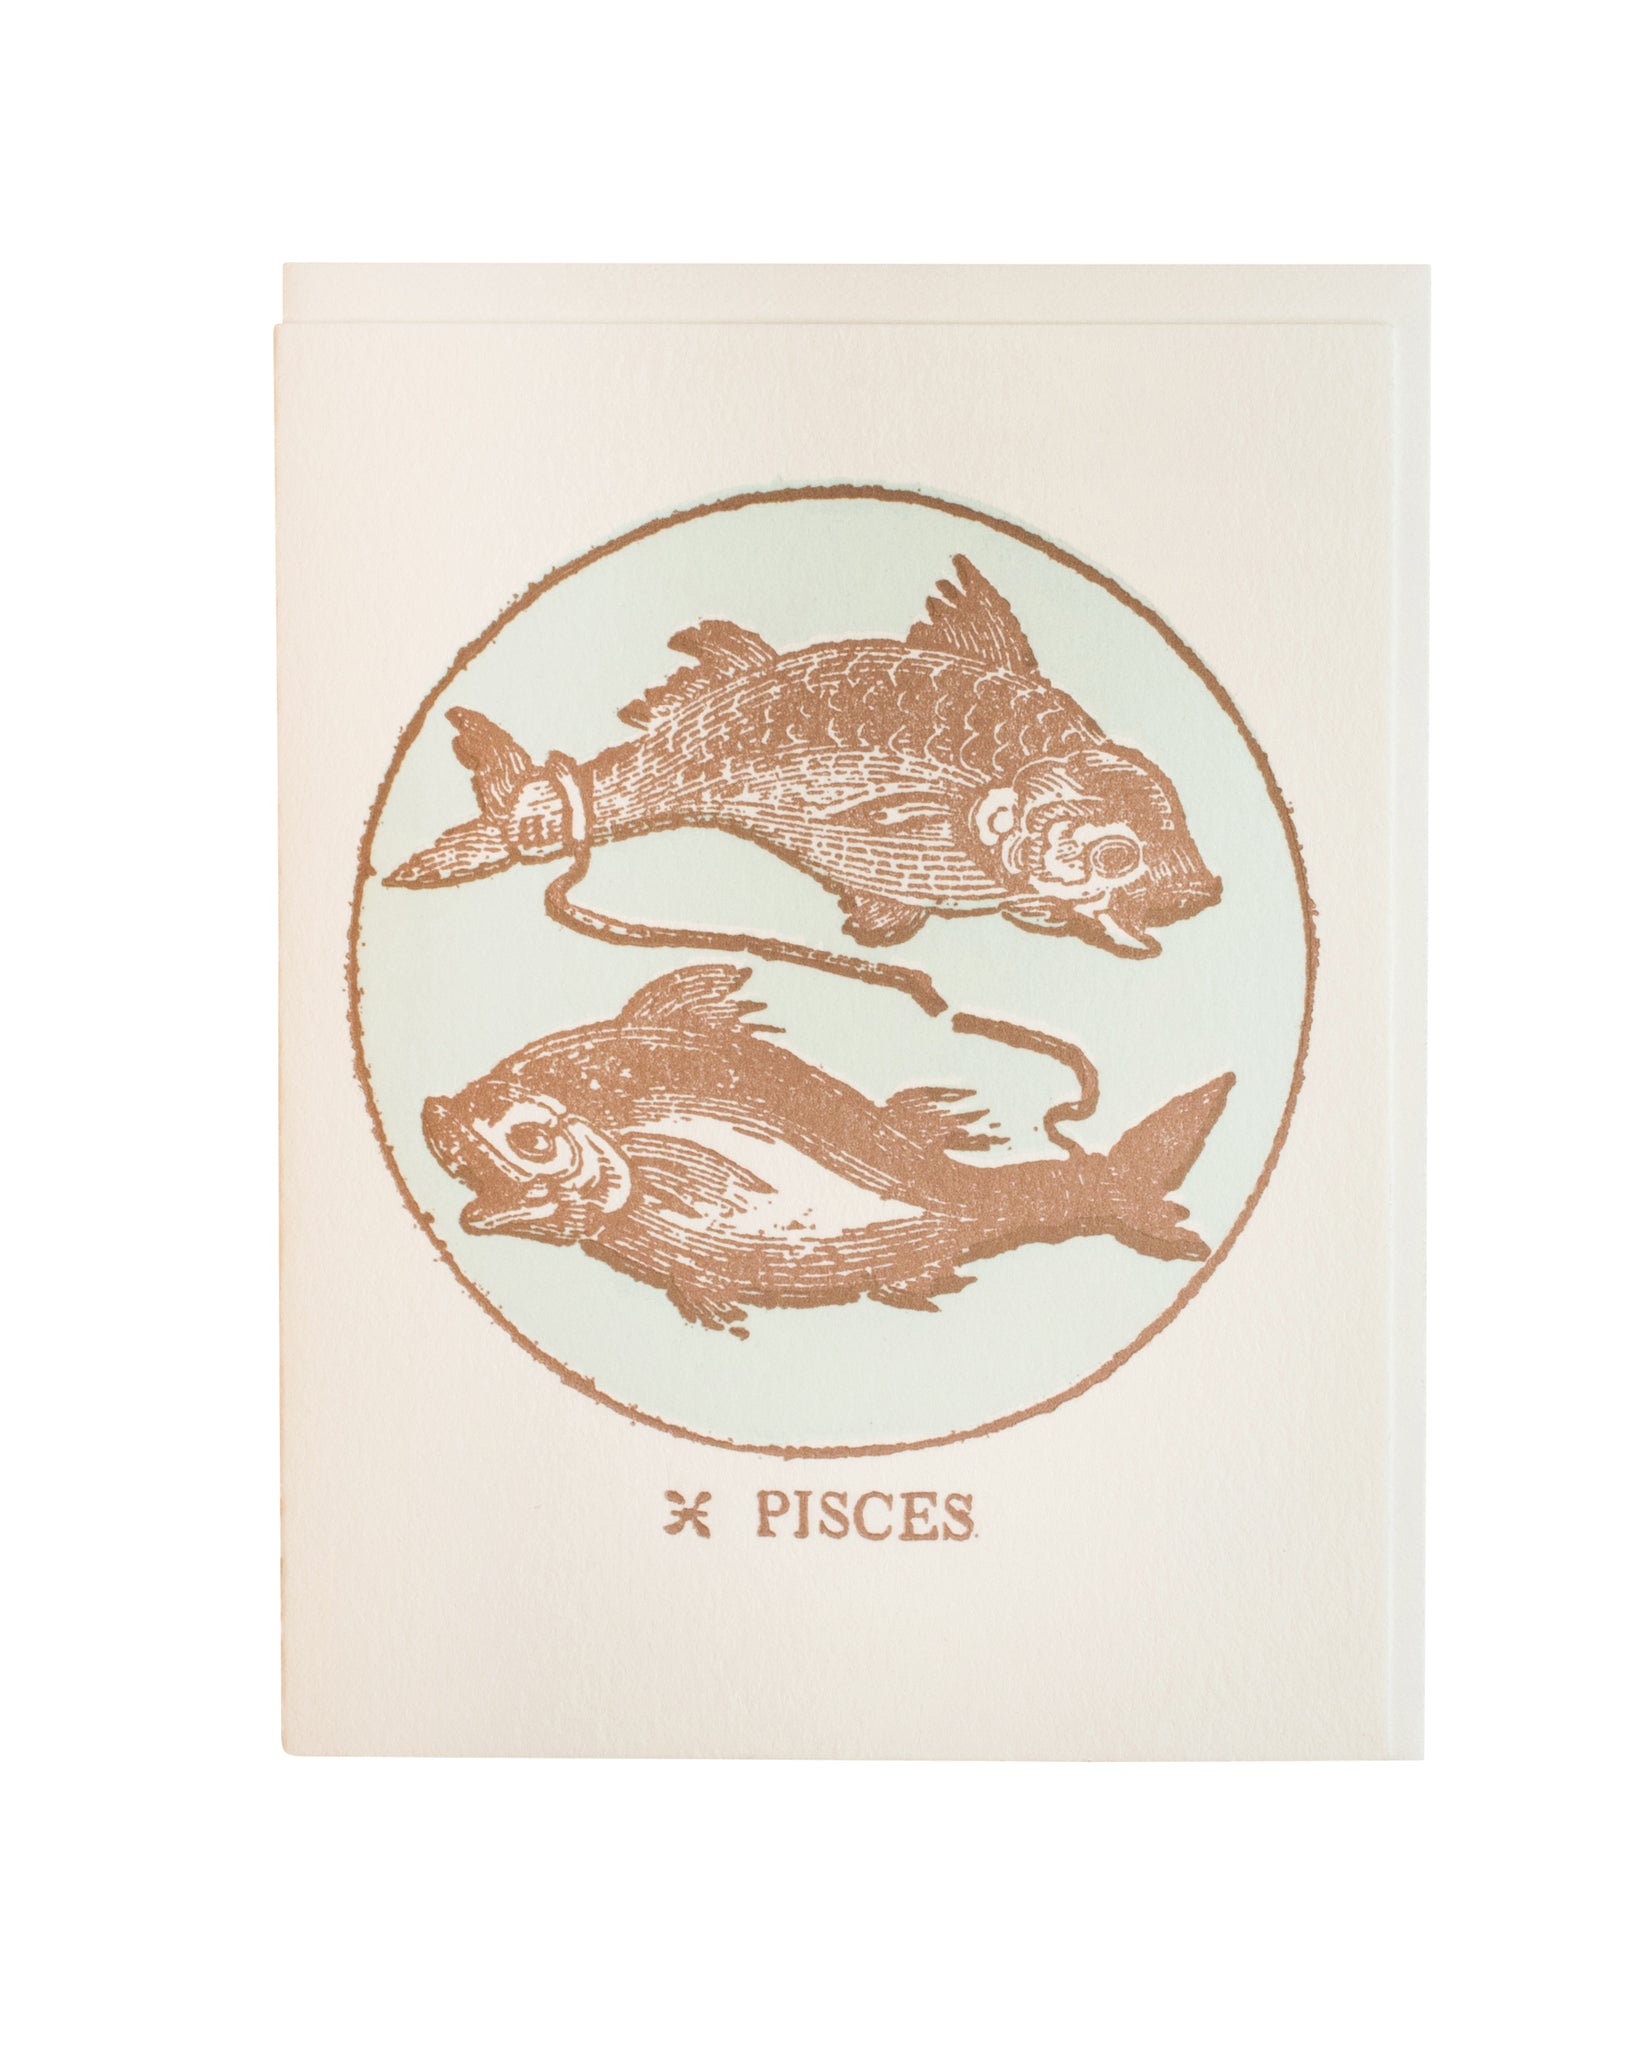 Pisces (February 19 - March 20)